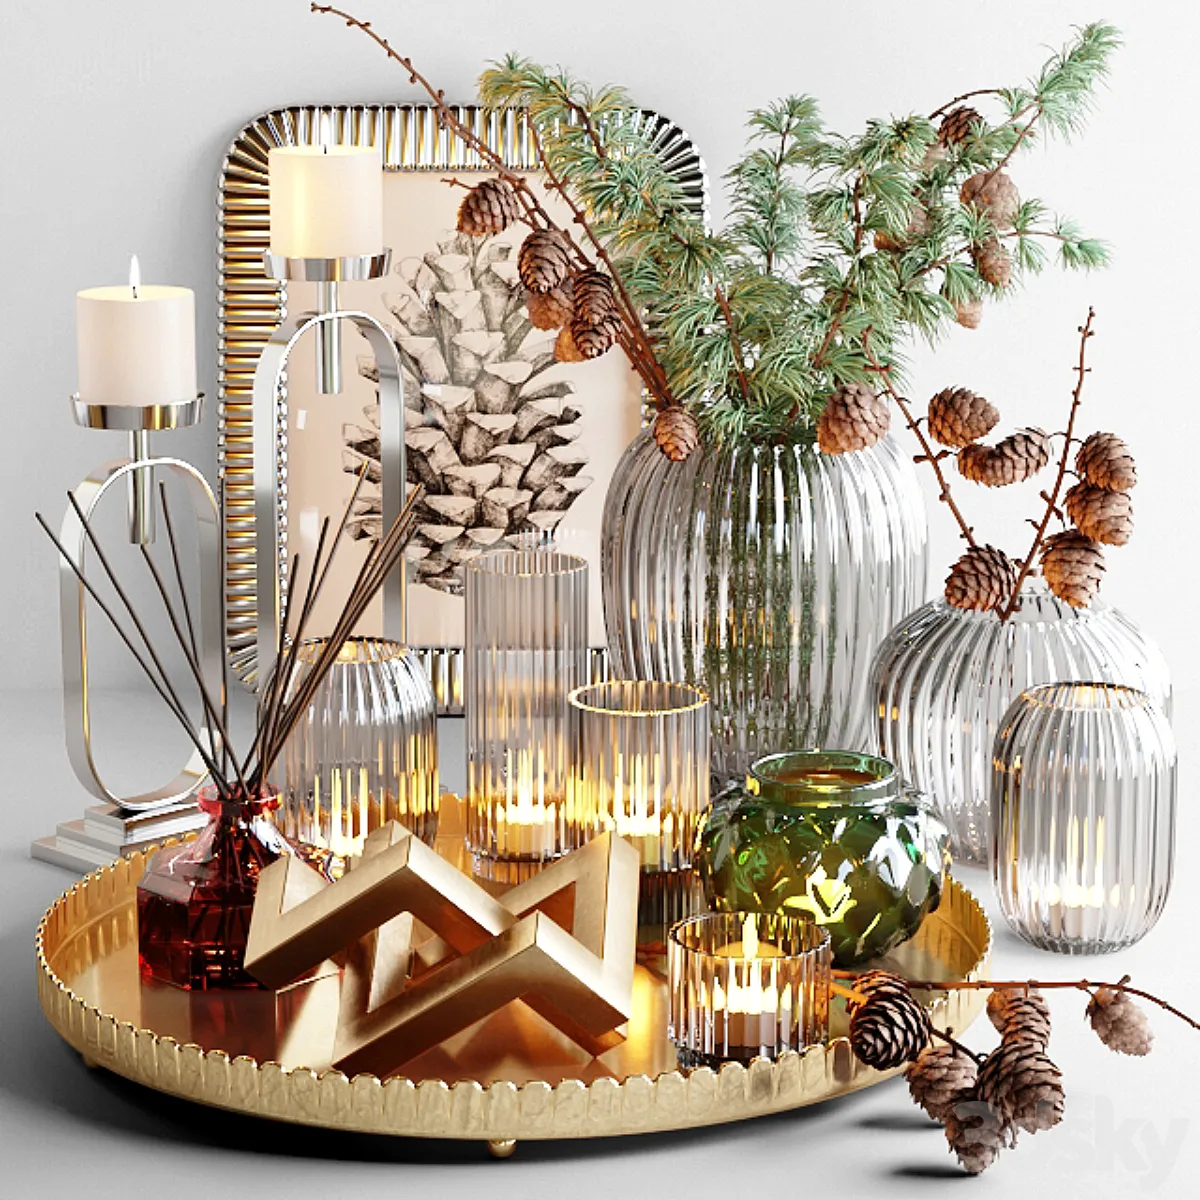 3dsky - Decorative set with larch branch and candles